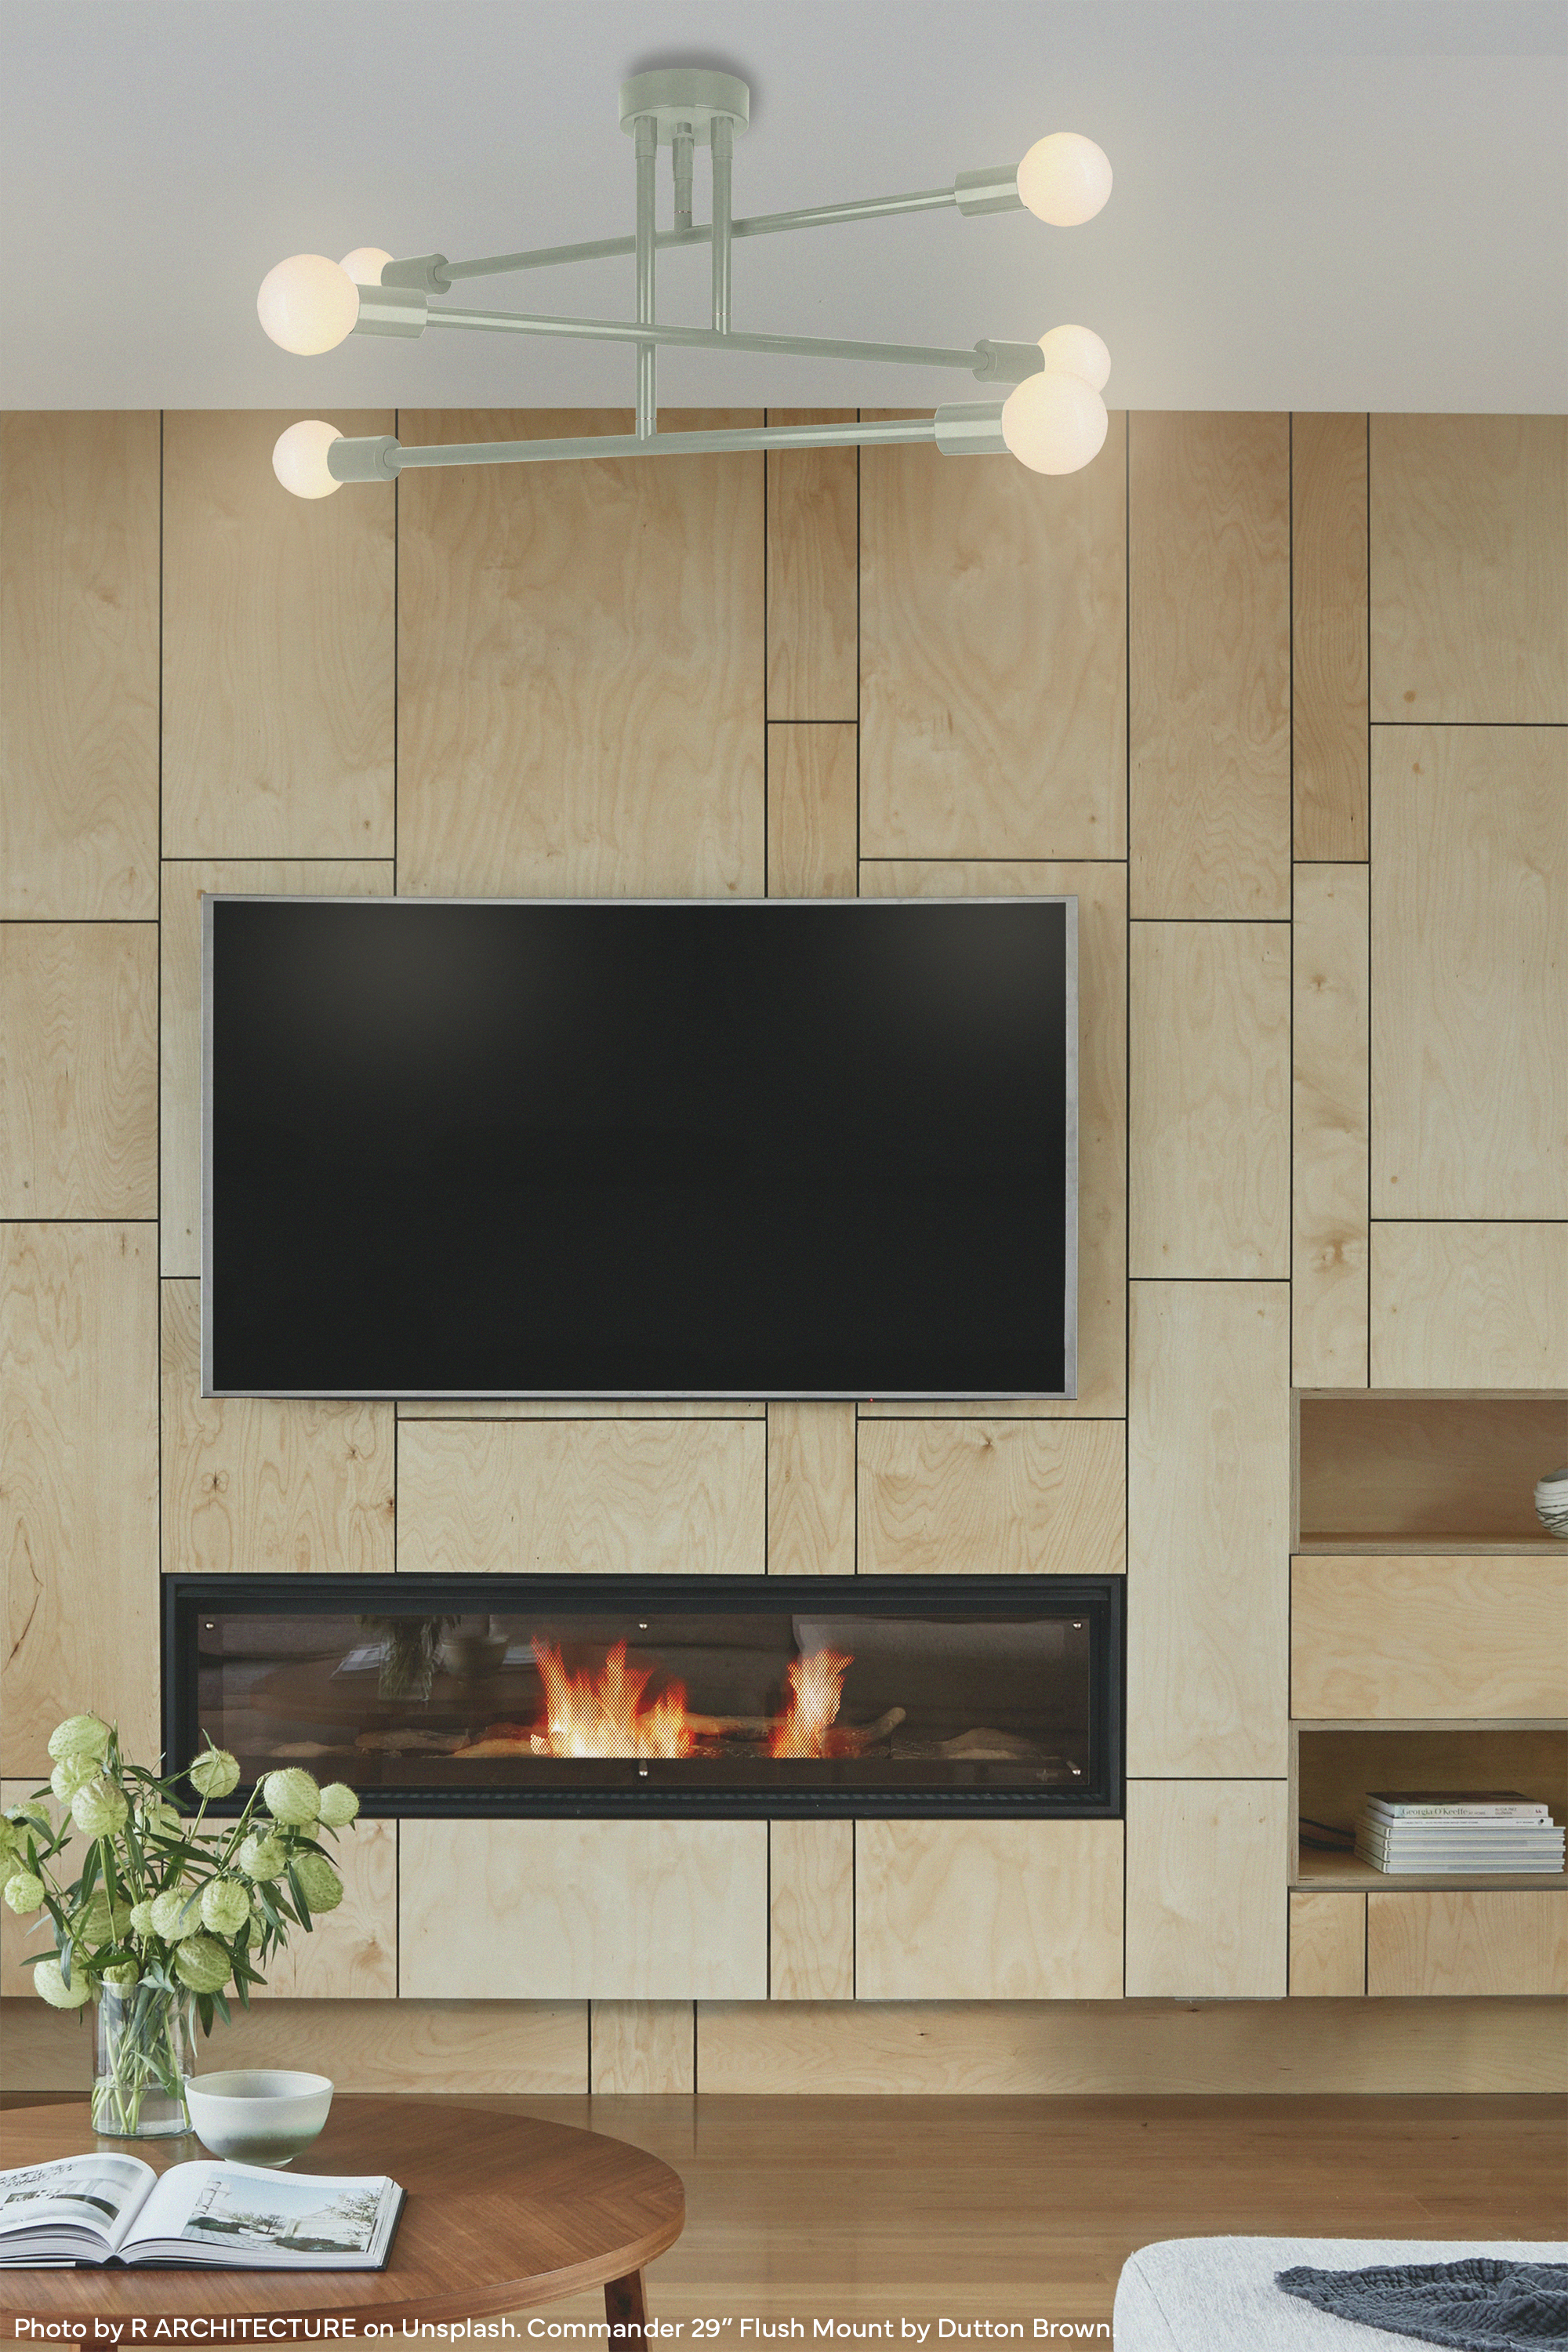 Spa color Commander flush mount 29" by Dutton Brown. Photo by R ARCHITECTURE on Unsplash. _hover